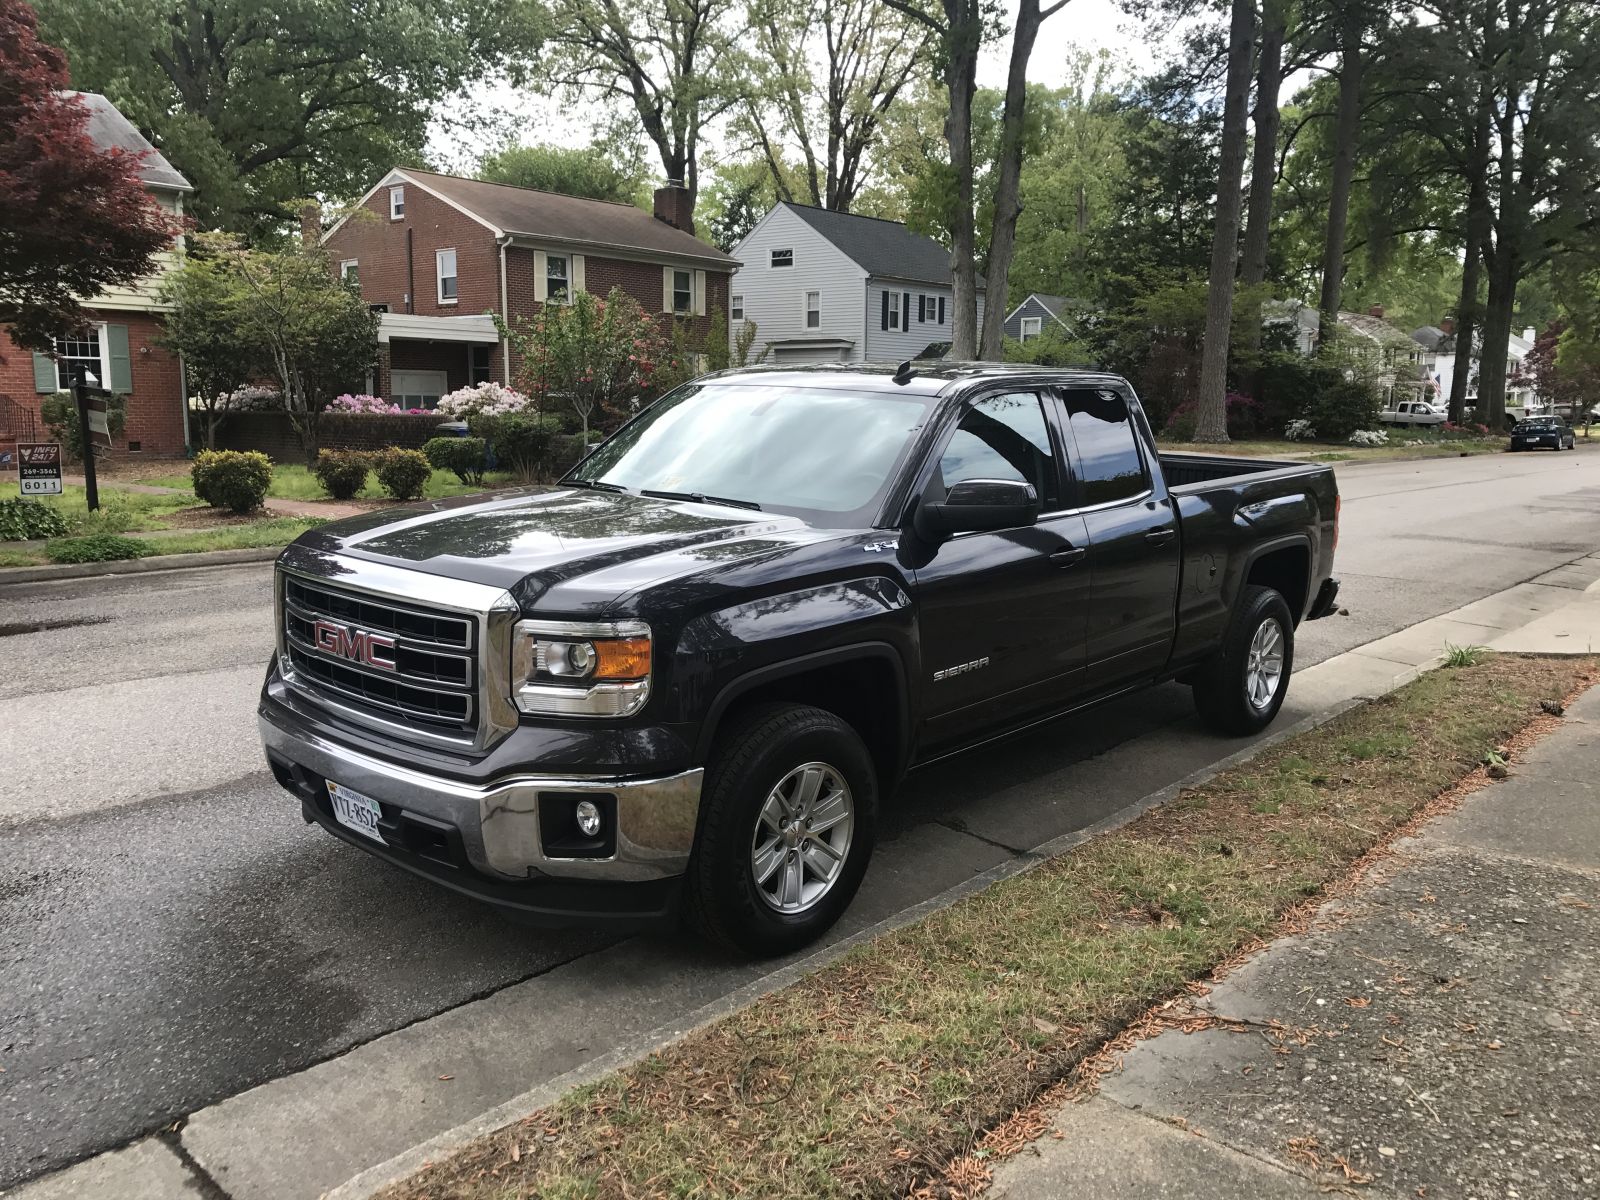 New Truck (At Least to Me) 